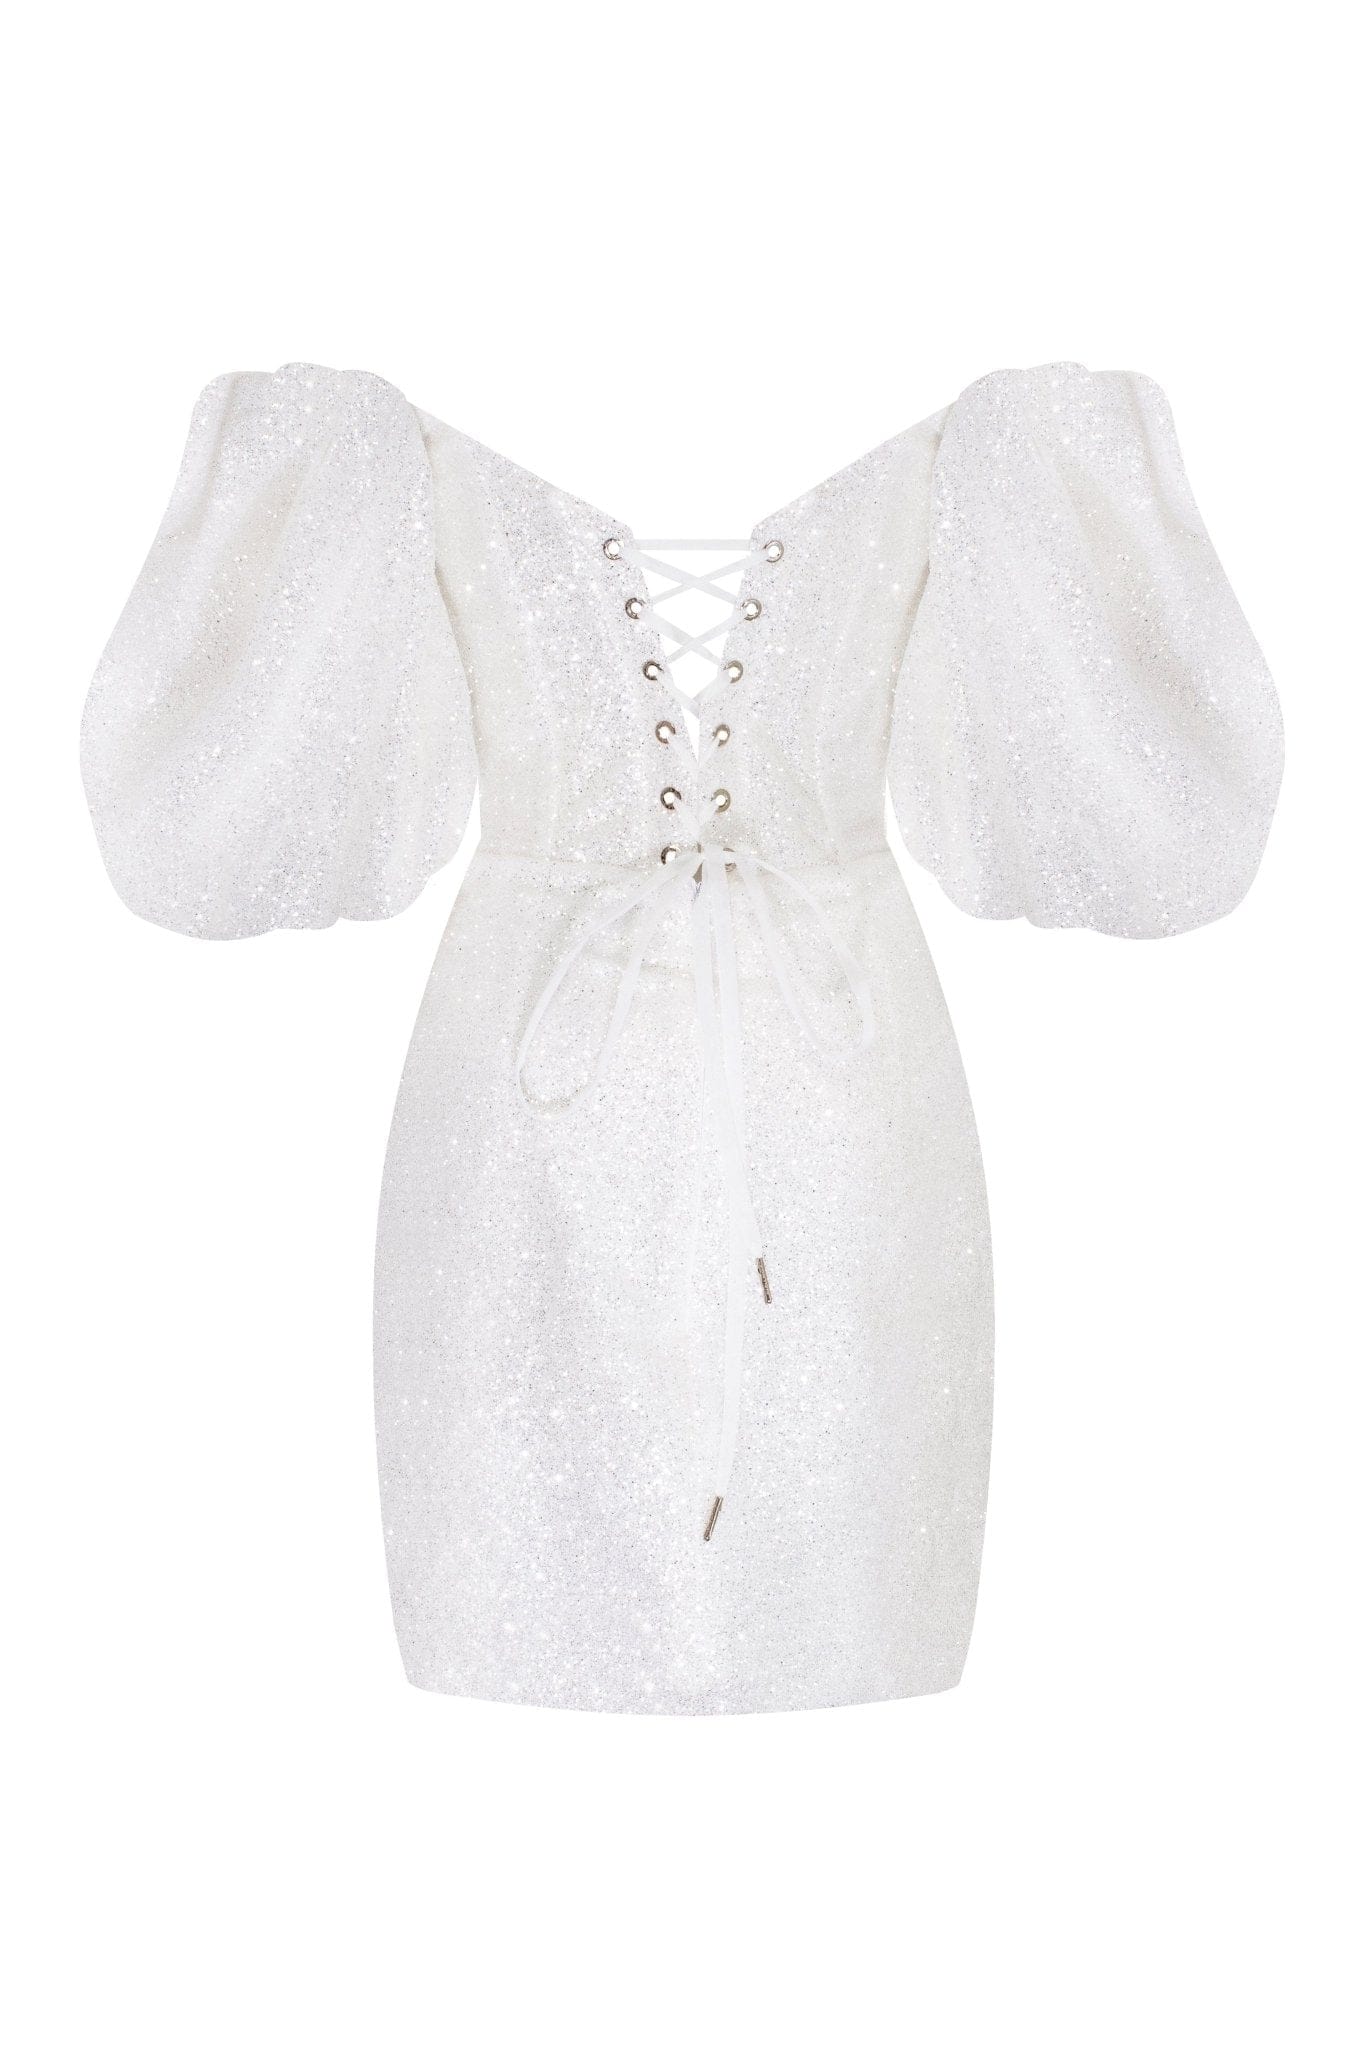 White babydoll dress ➤➤ Milla Dresses - USA, Worldwide delivery